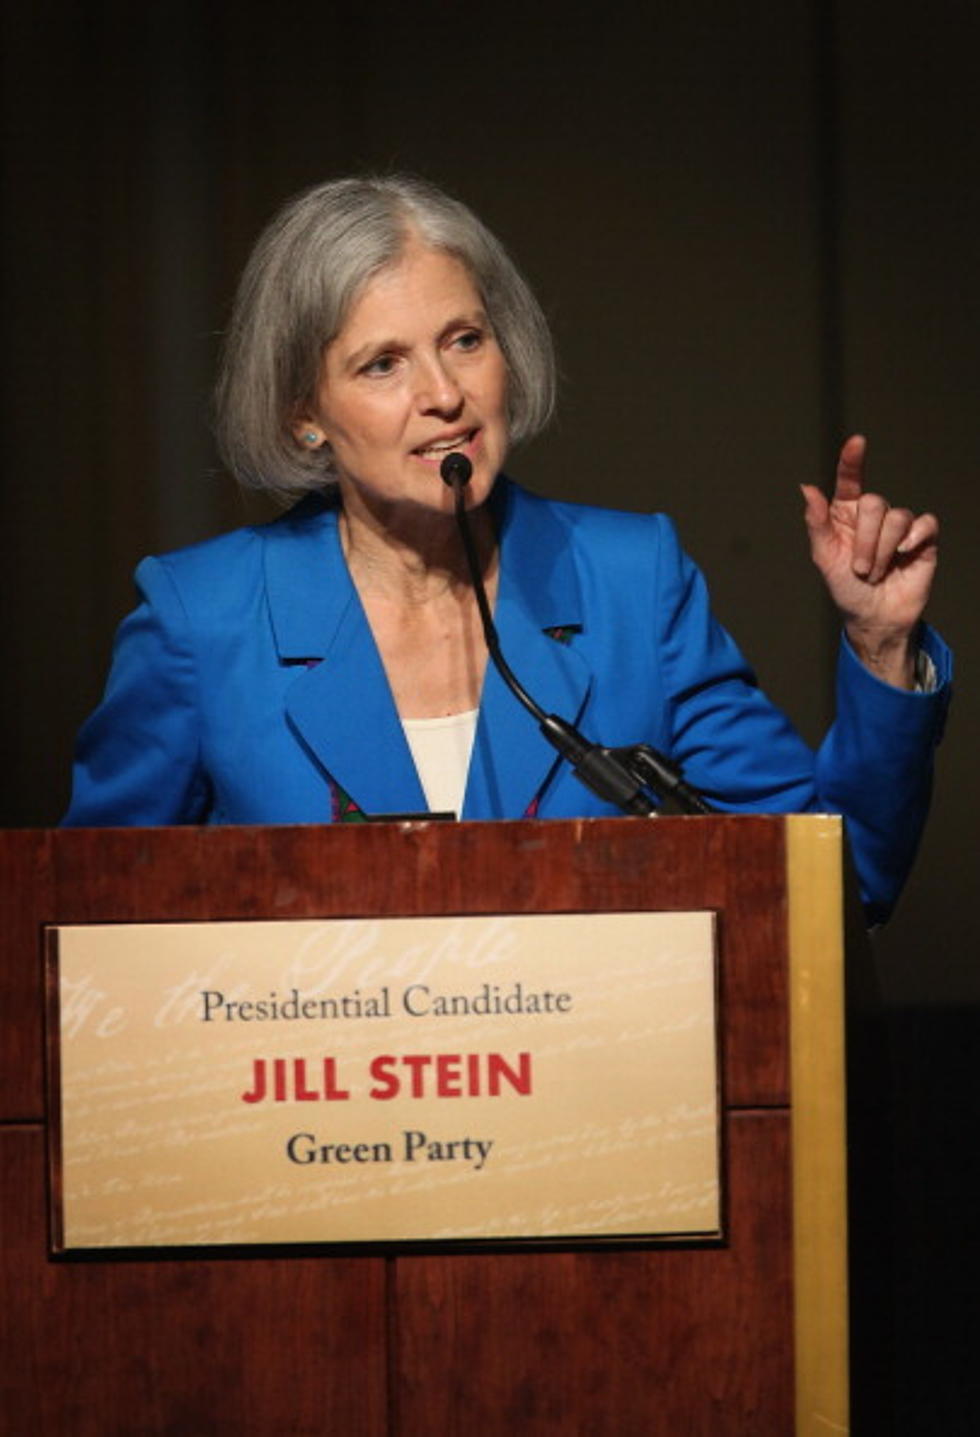 Green Party Presidential Candidate Jill Stein Jailed in East Texas